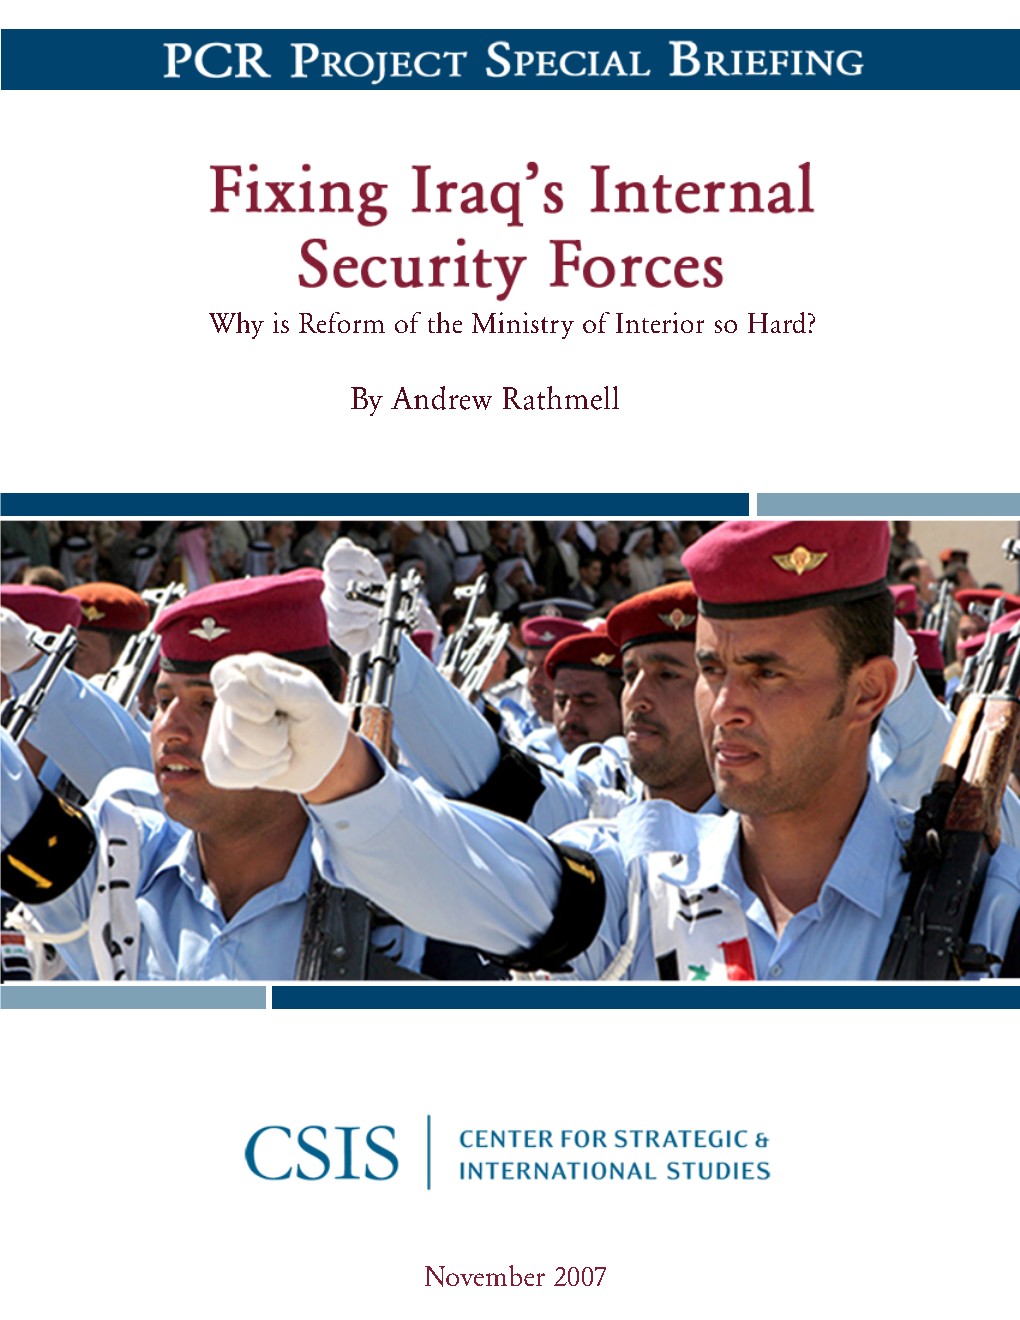 Fixing Iraq's Internal Security Forces